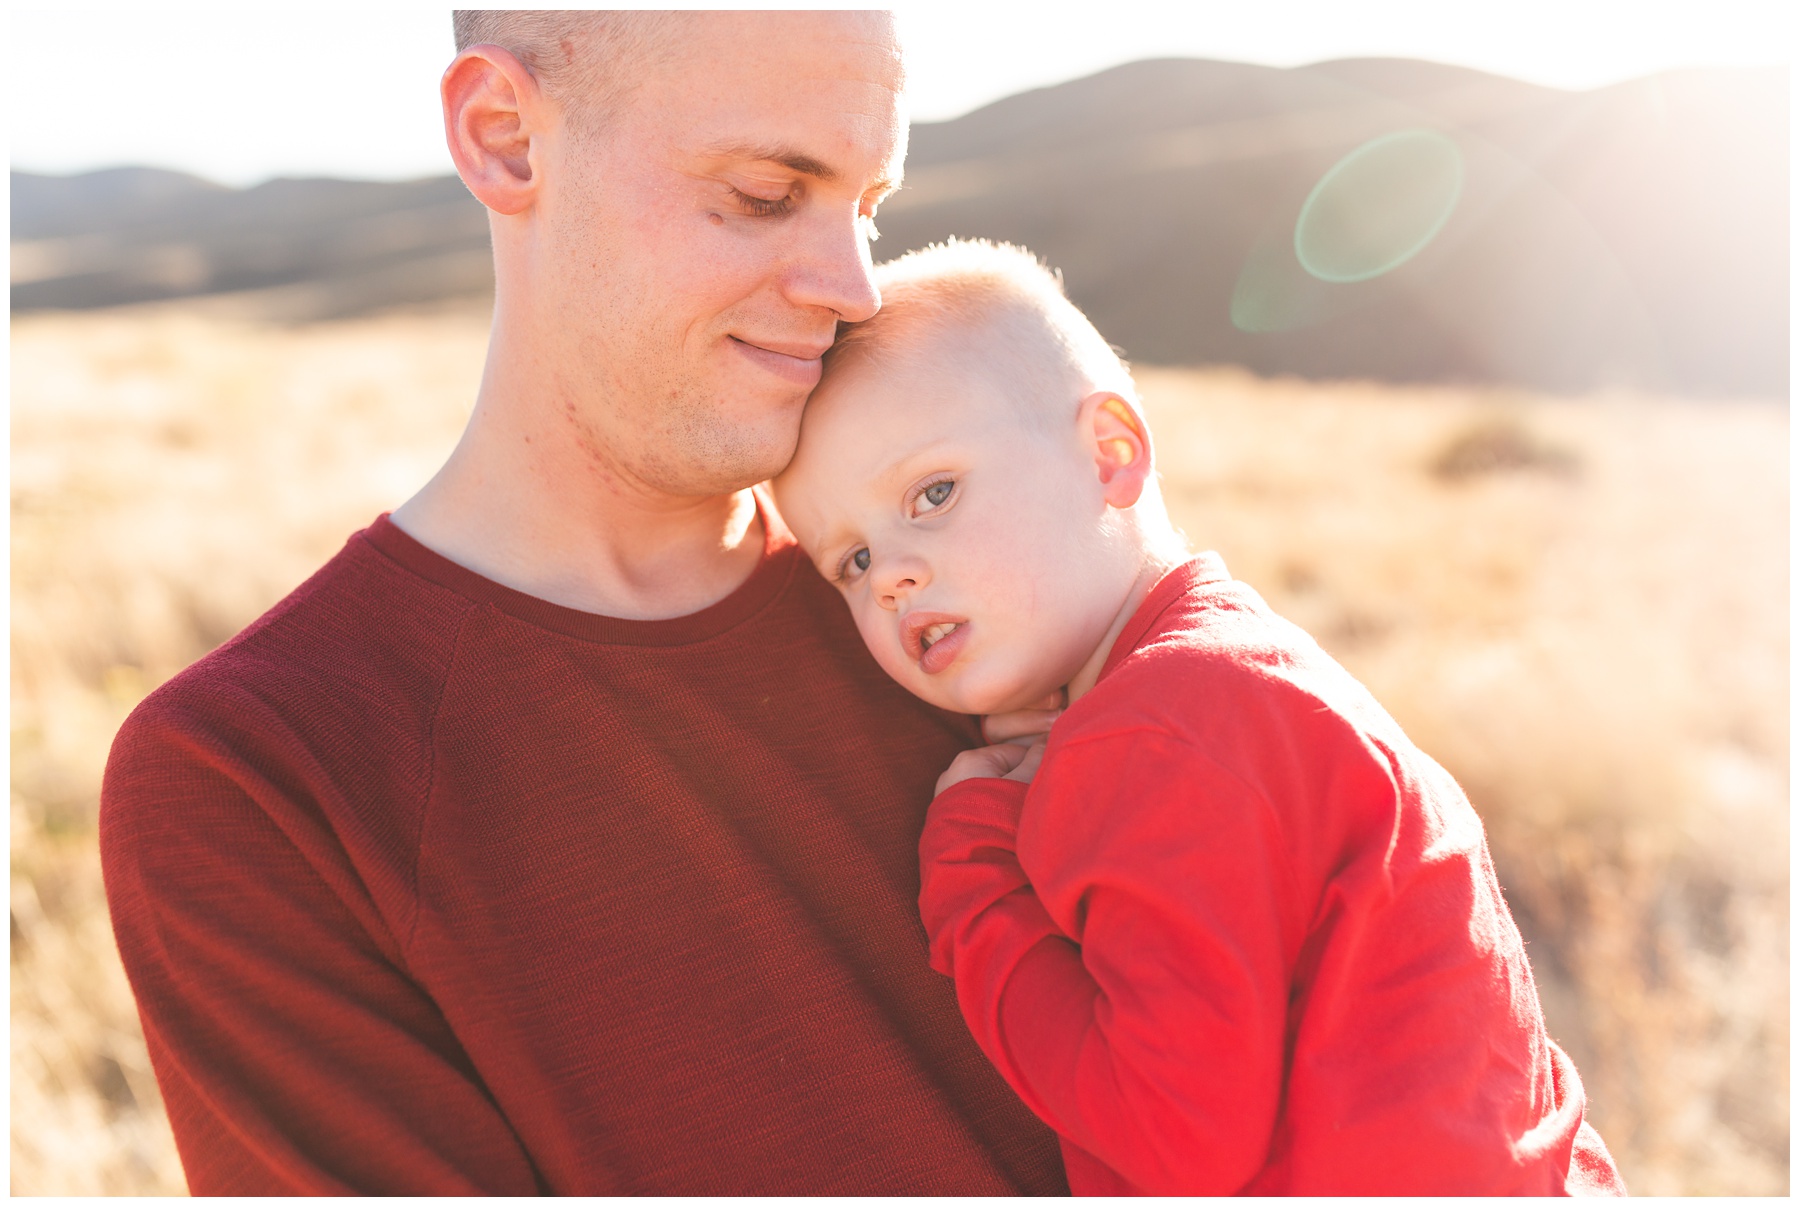 Son and father in the sunlight with natural skin tones Photo by Miranda Renee